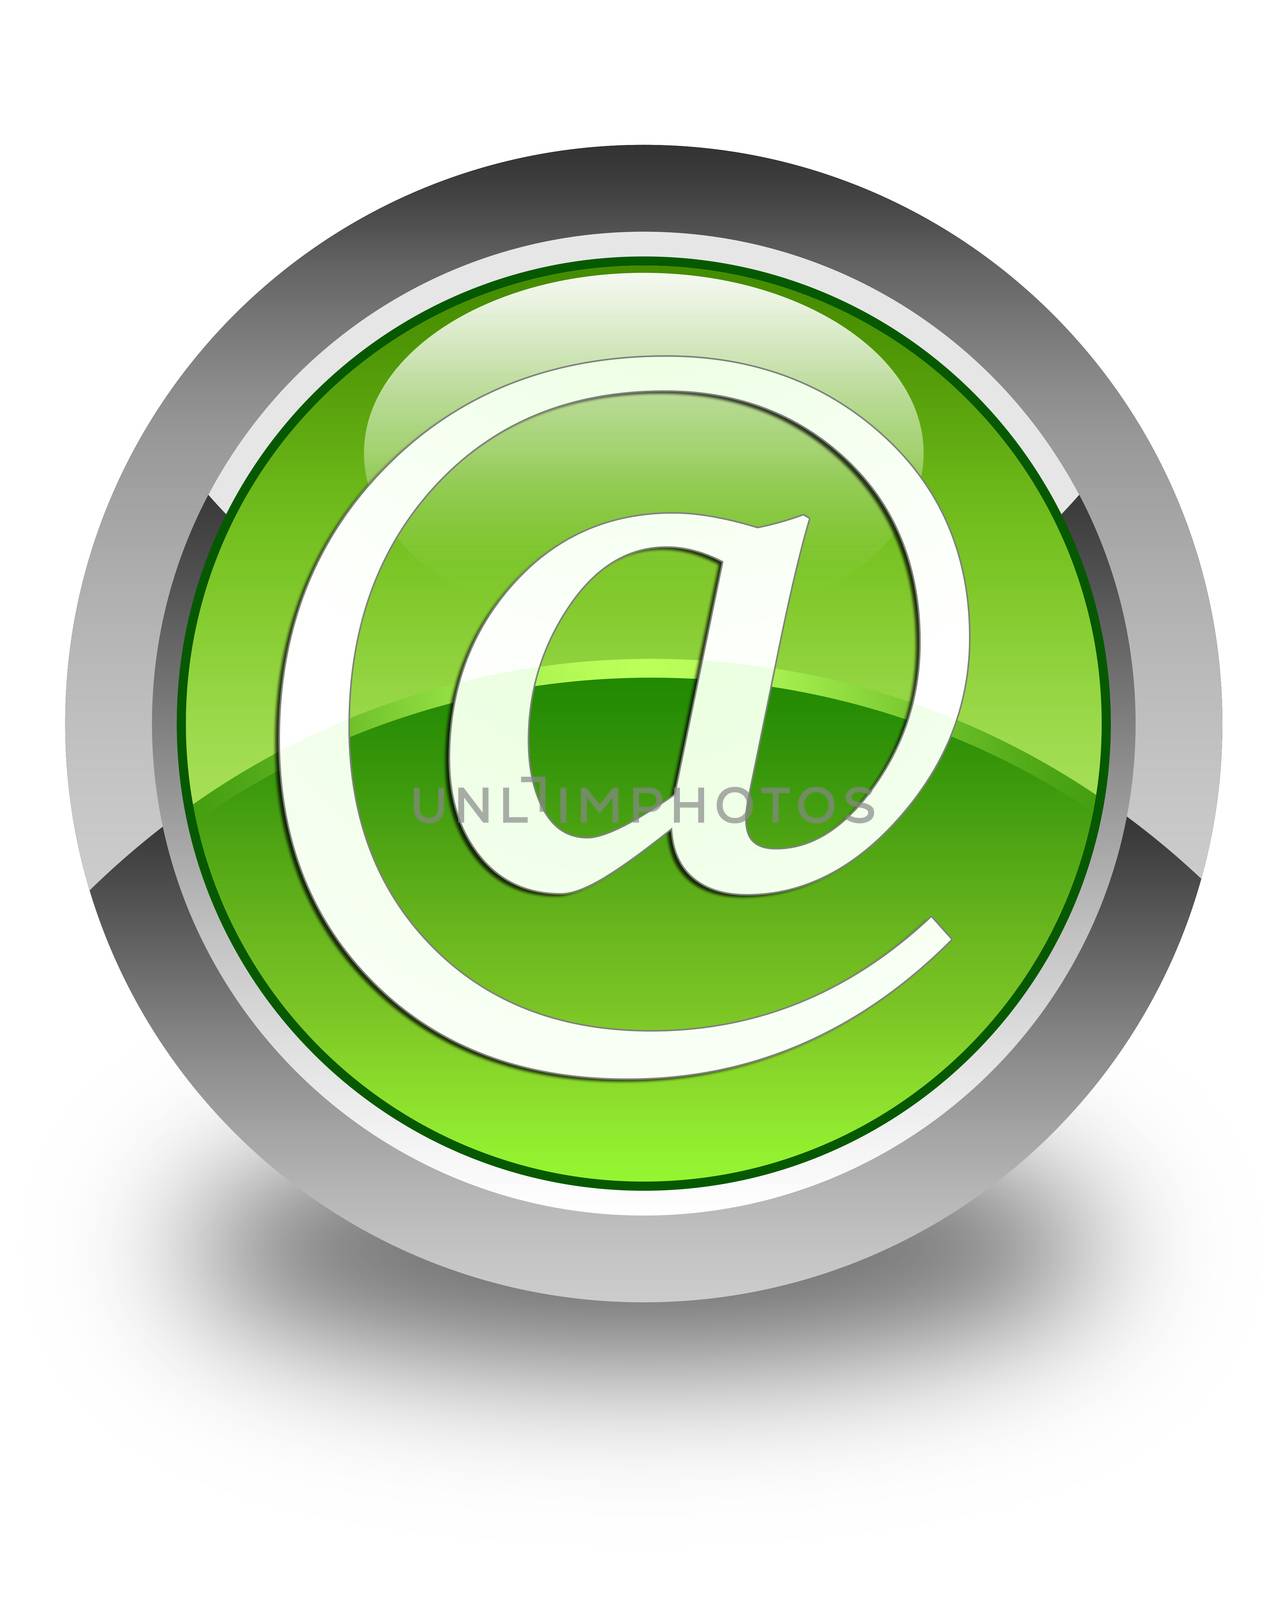 Email address icon on glossy green round button